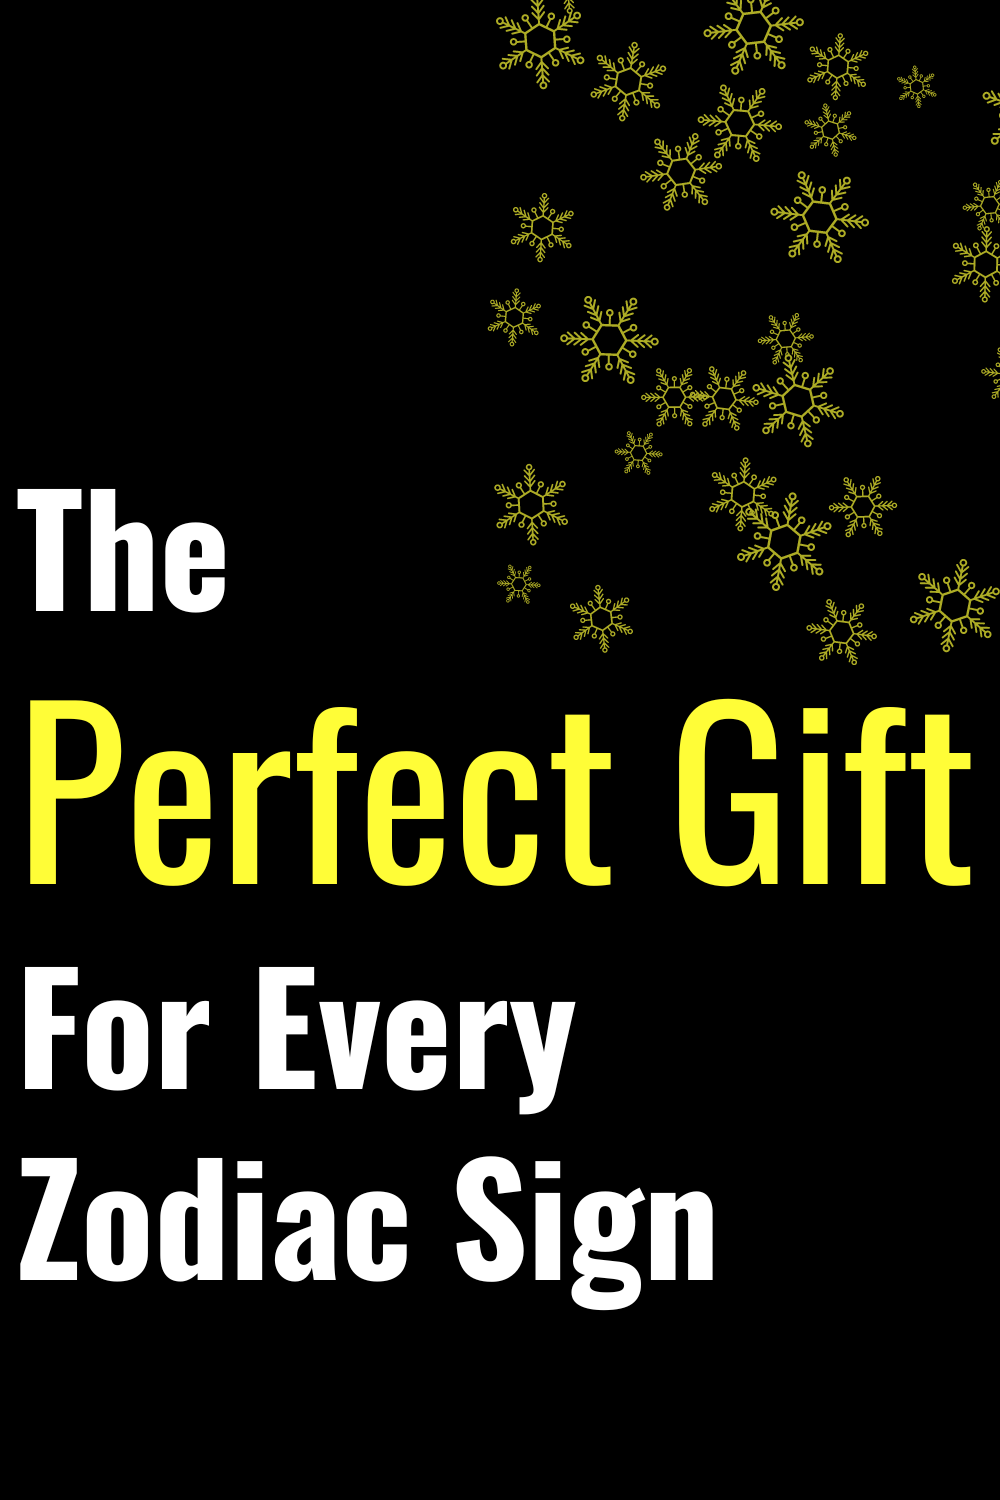 The Perfect Gift For Every Zodiac Sign